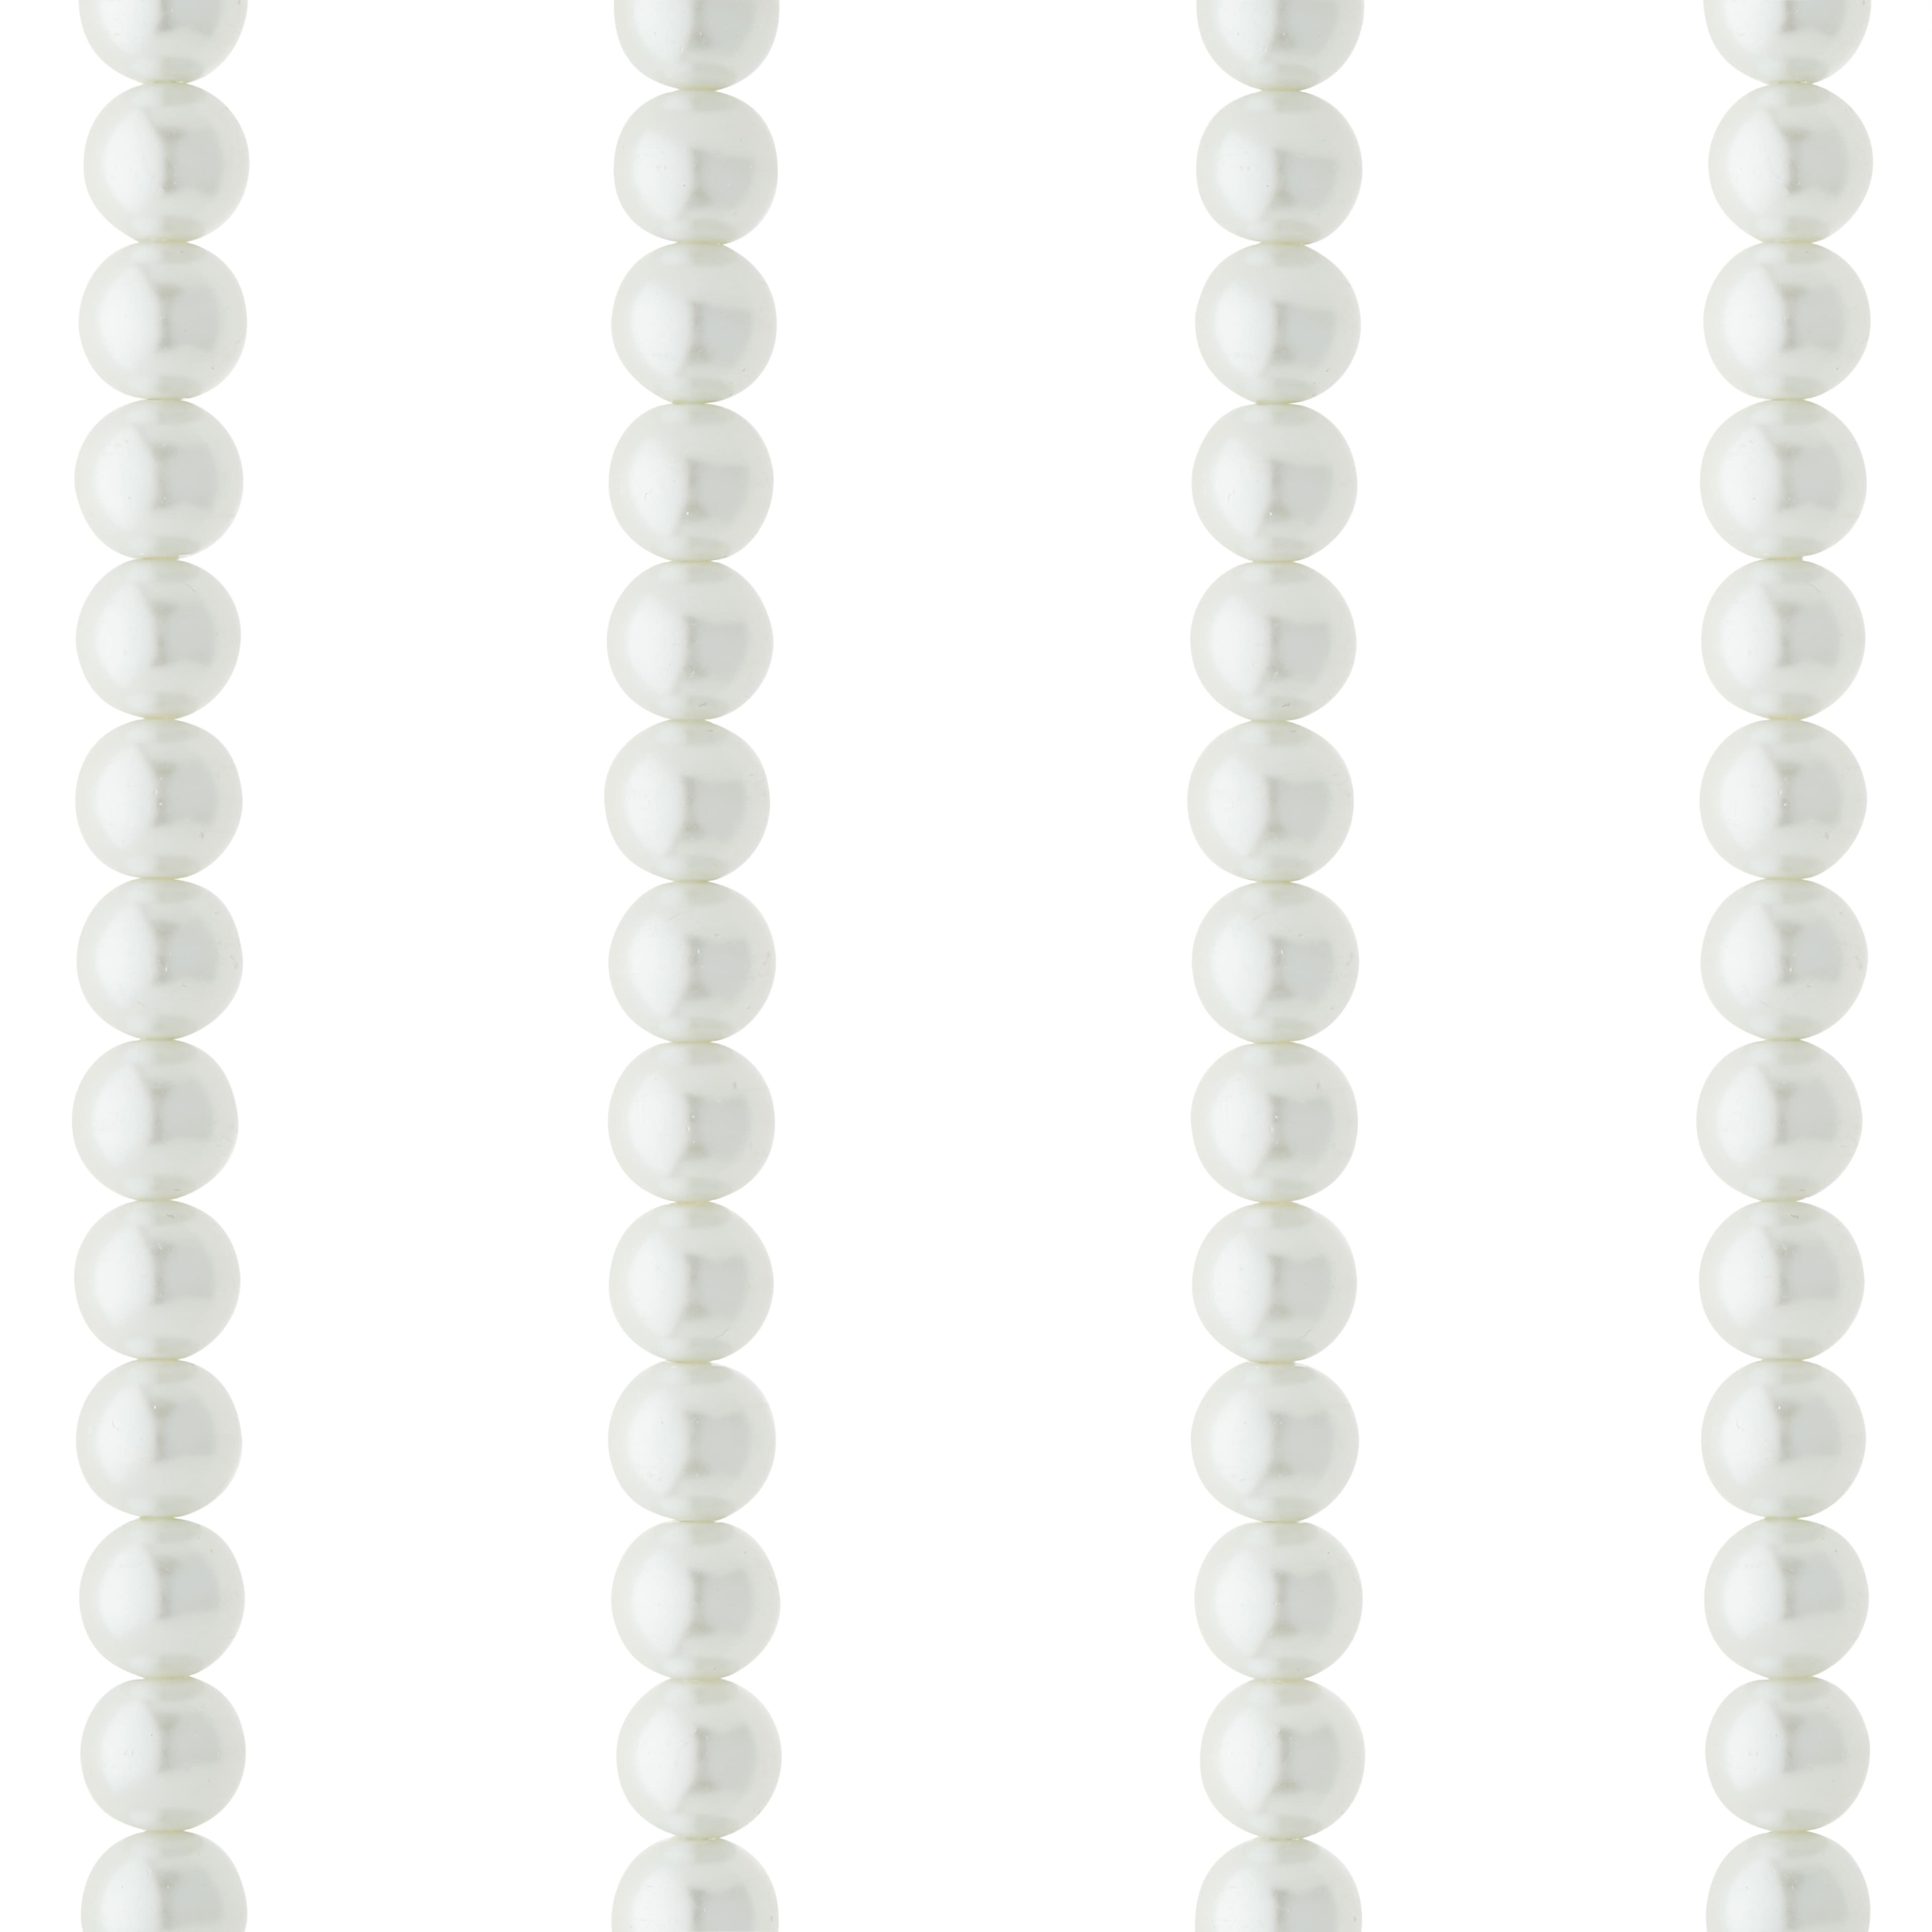 9 Packs: 72 ct. (648 total) Glass White Pearl Round Beads, 10mm by Bead Landing&#x2122;